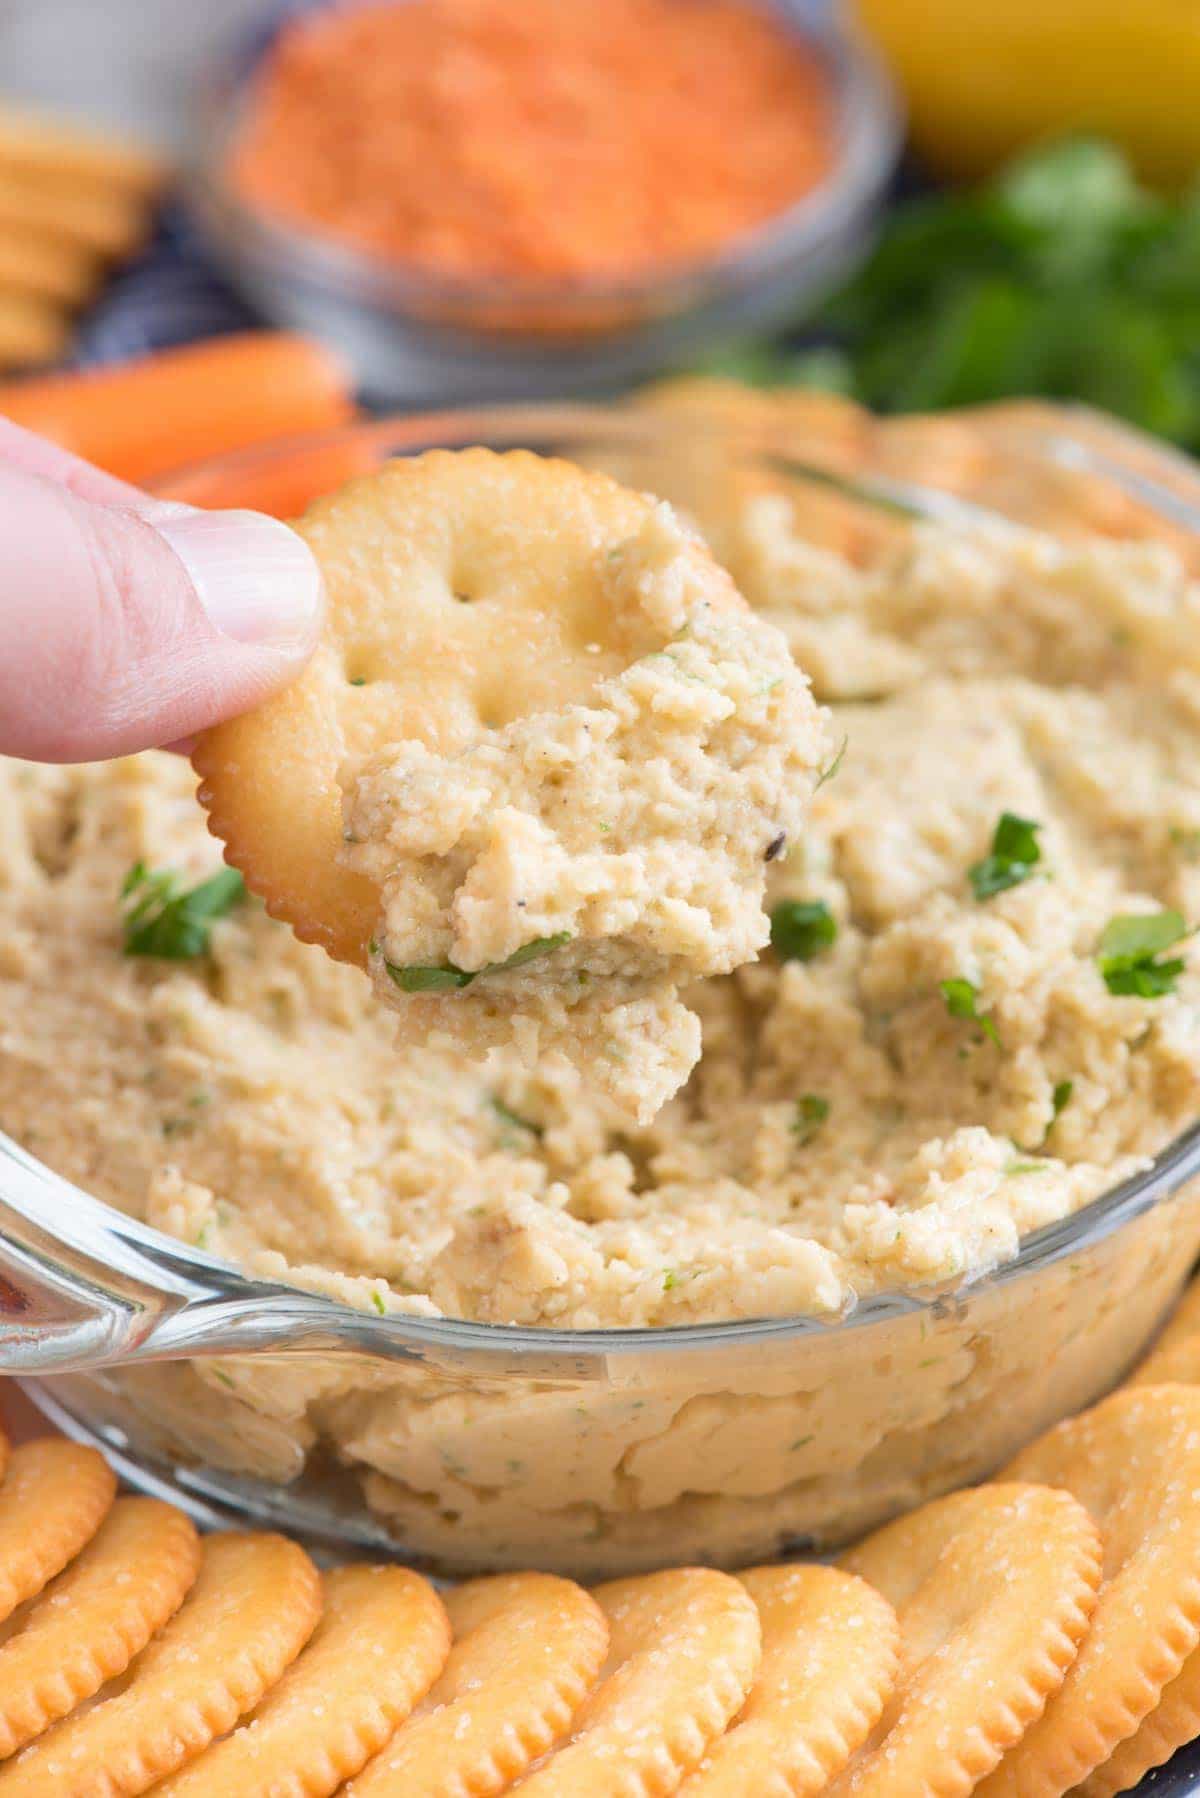 Roasted Garlic Lentil Dip - if you love white bean dip this LENTIL dip is for you! It's FULL of roasted garlic and protein and is the best snack or meal!